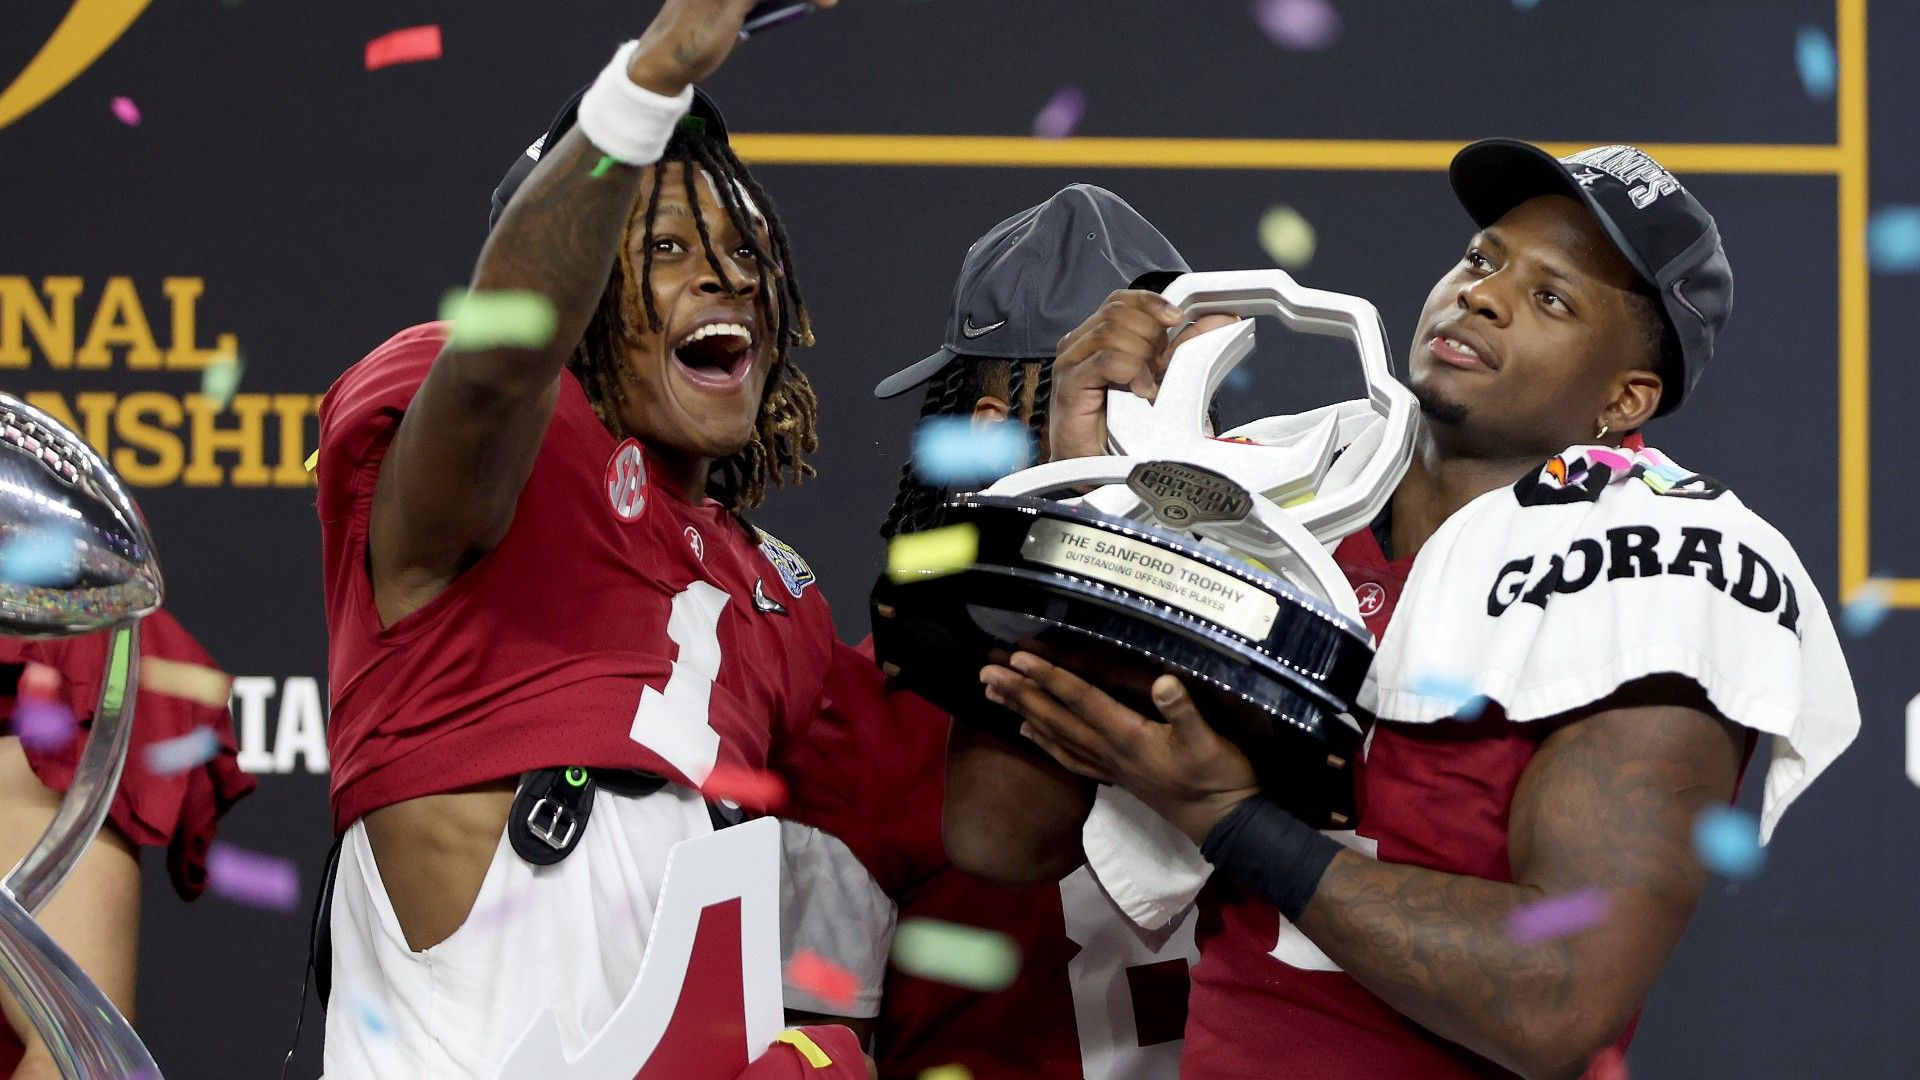 Top-ranked Alabama rolls into title game, will face a recharged Georgia side